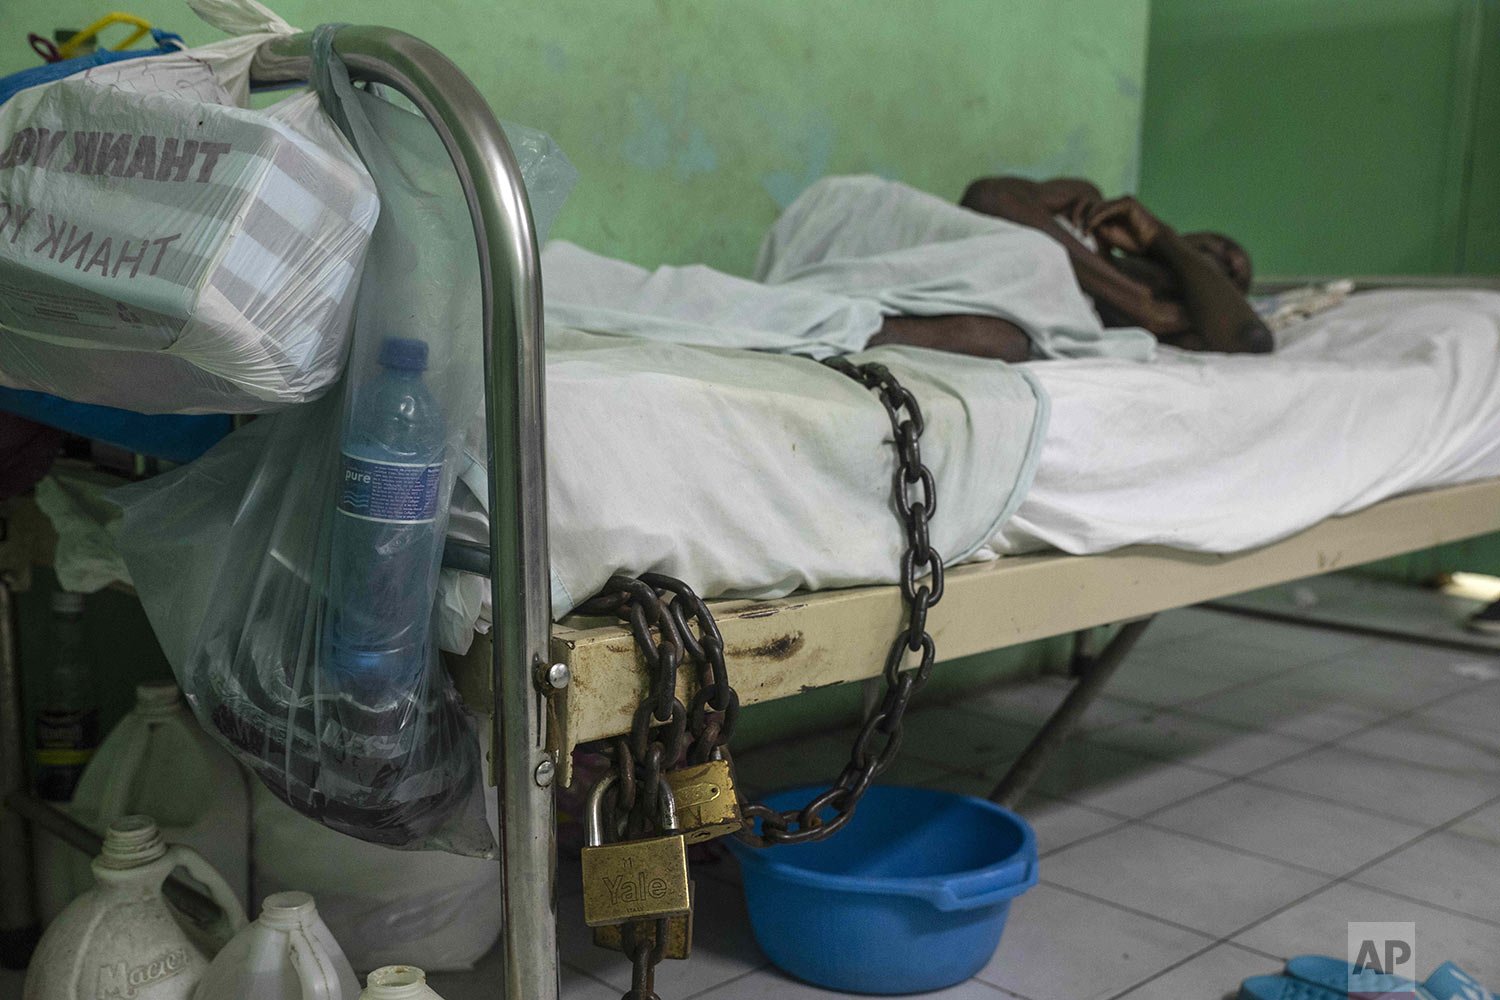  A chained prisoner lies on a bed at the General Hospital during a strike by hospital workers demanding better working conditions in Port-au-Prince, Haiti, Feb. 25, 2022. (AP Photo/Odelyn Joseph) 